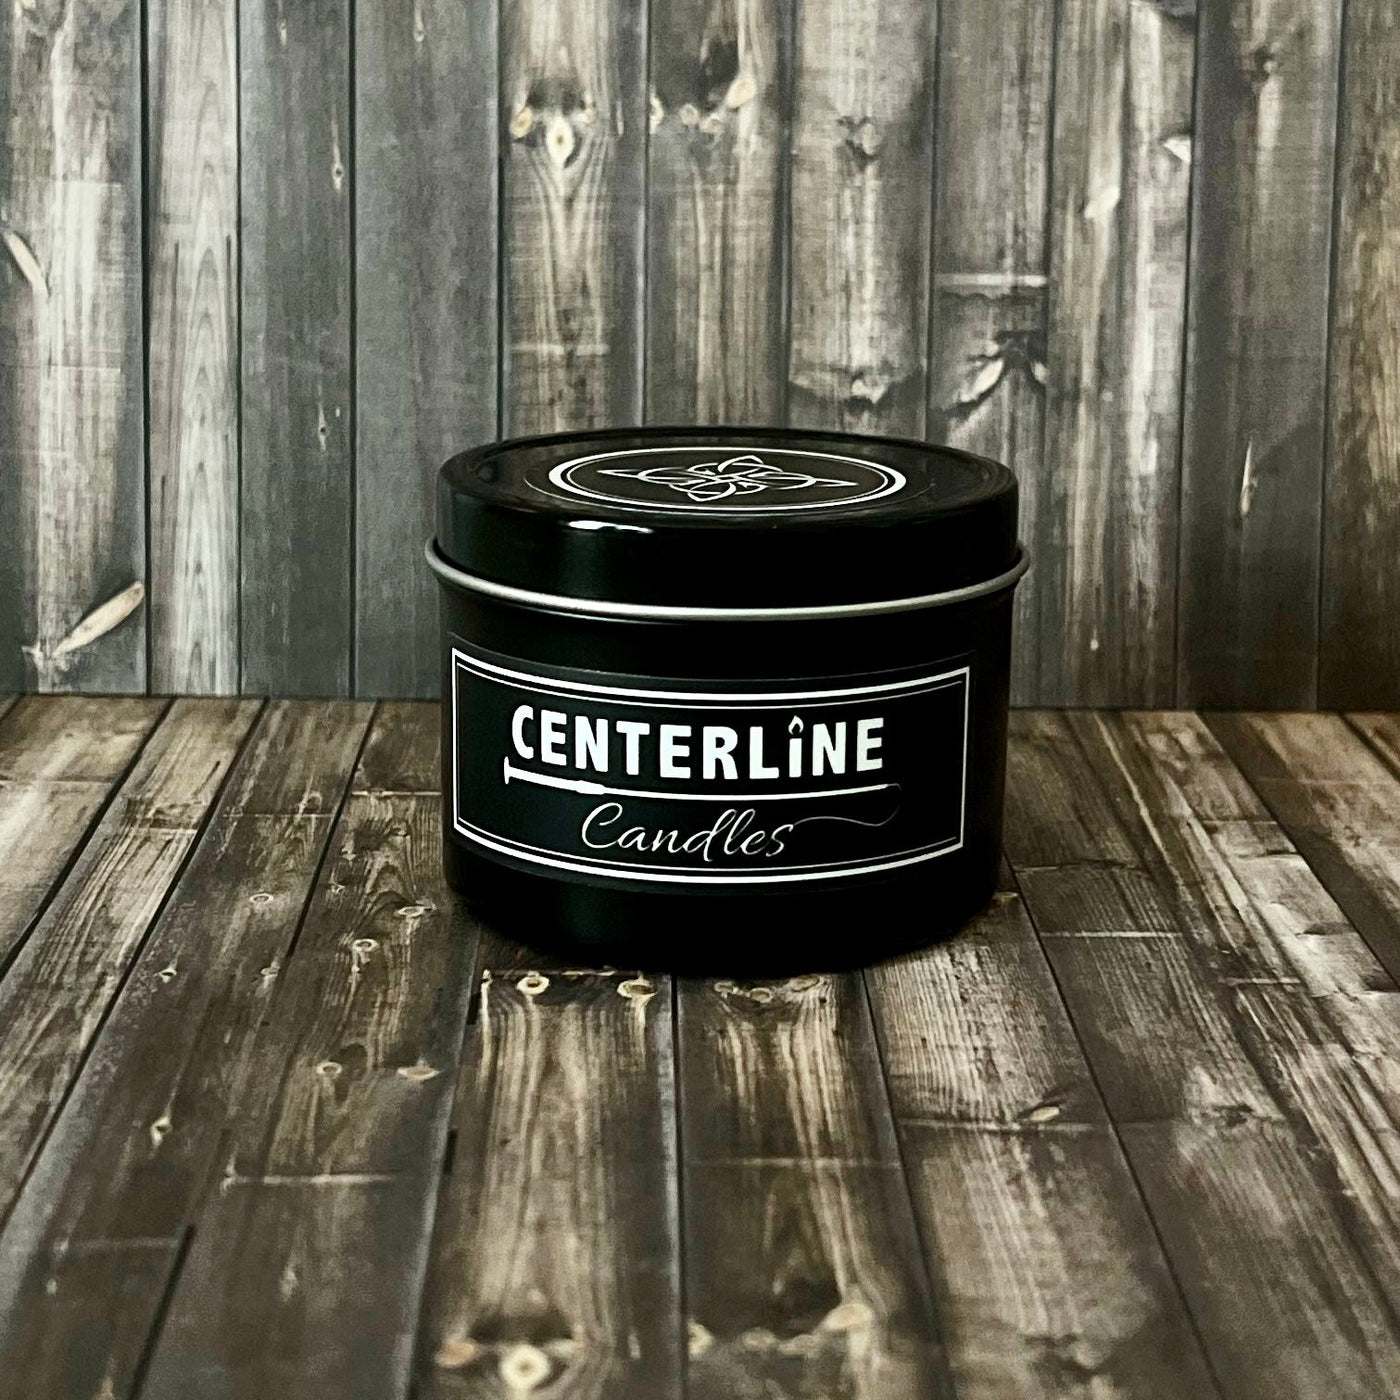 Springtime in the Bluegrass by Centerline Candles